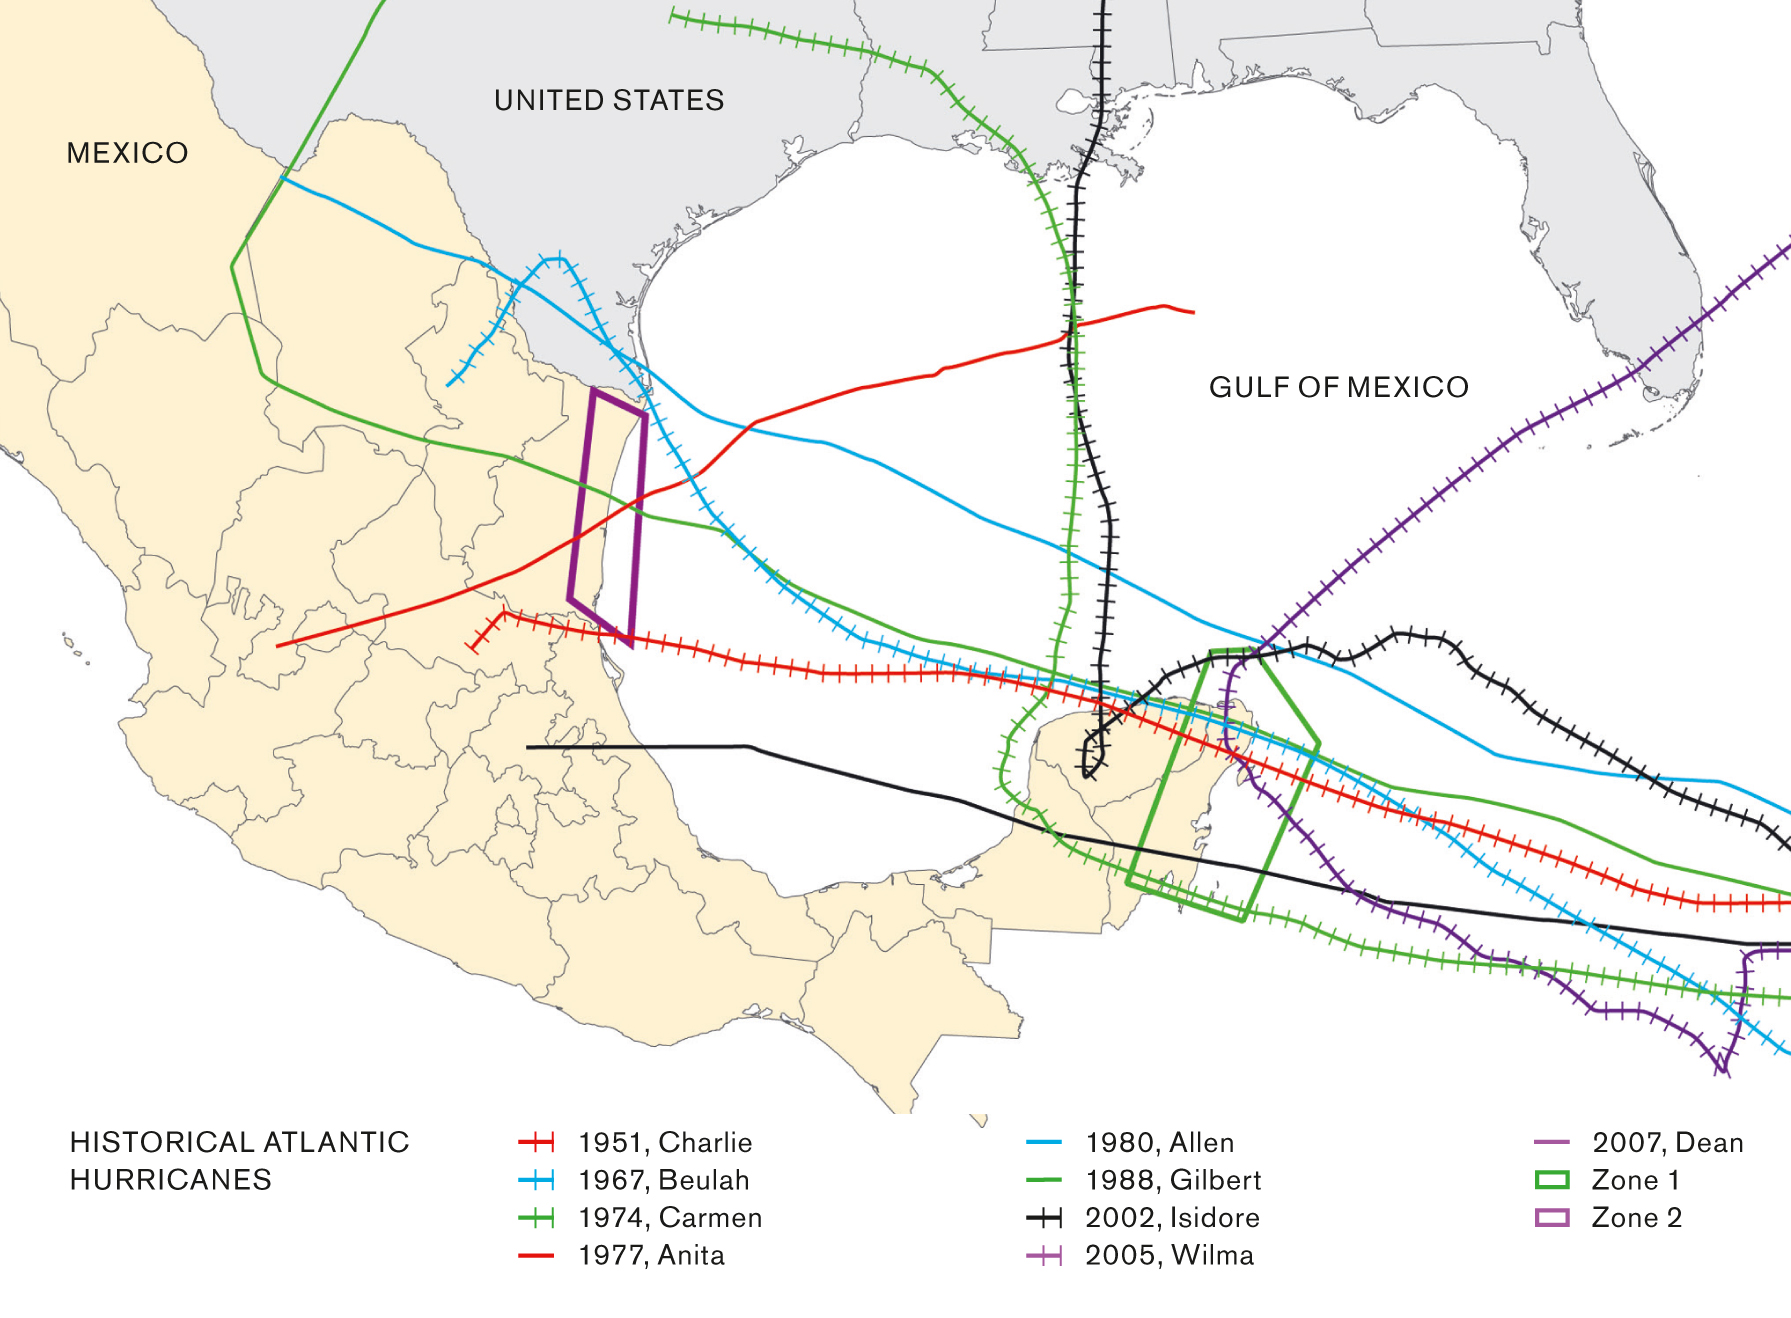 Image from risk appendix to the offering prospective for the MultiCat Mexico Ltd. cat bond,  series 2012-I. This $315-million issue has a double trigger structure, covering both hurricanes and earthquakes. The parametrics for the two kinds of natural disaster are different, but both make use of specific geographical “boxes” where a trigger event must occur. This graphic depicts the tracks of all of the historically recorded named storms to pass through the hurricane boxes. On the basis of the parametric model in the bond (which makes use of central pressure conditions in a given storm, as reported by NOAA), hurricanes Anita, Allen, Gilbert, and Dean would all have triggered a total loss for holders of MultiCat Mexico Ltd. bonds.